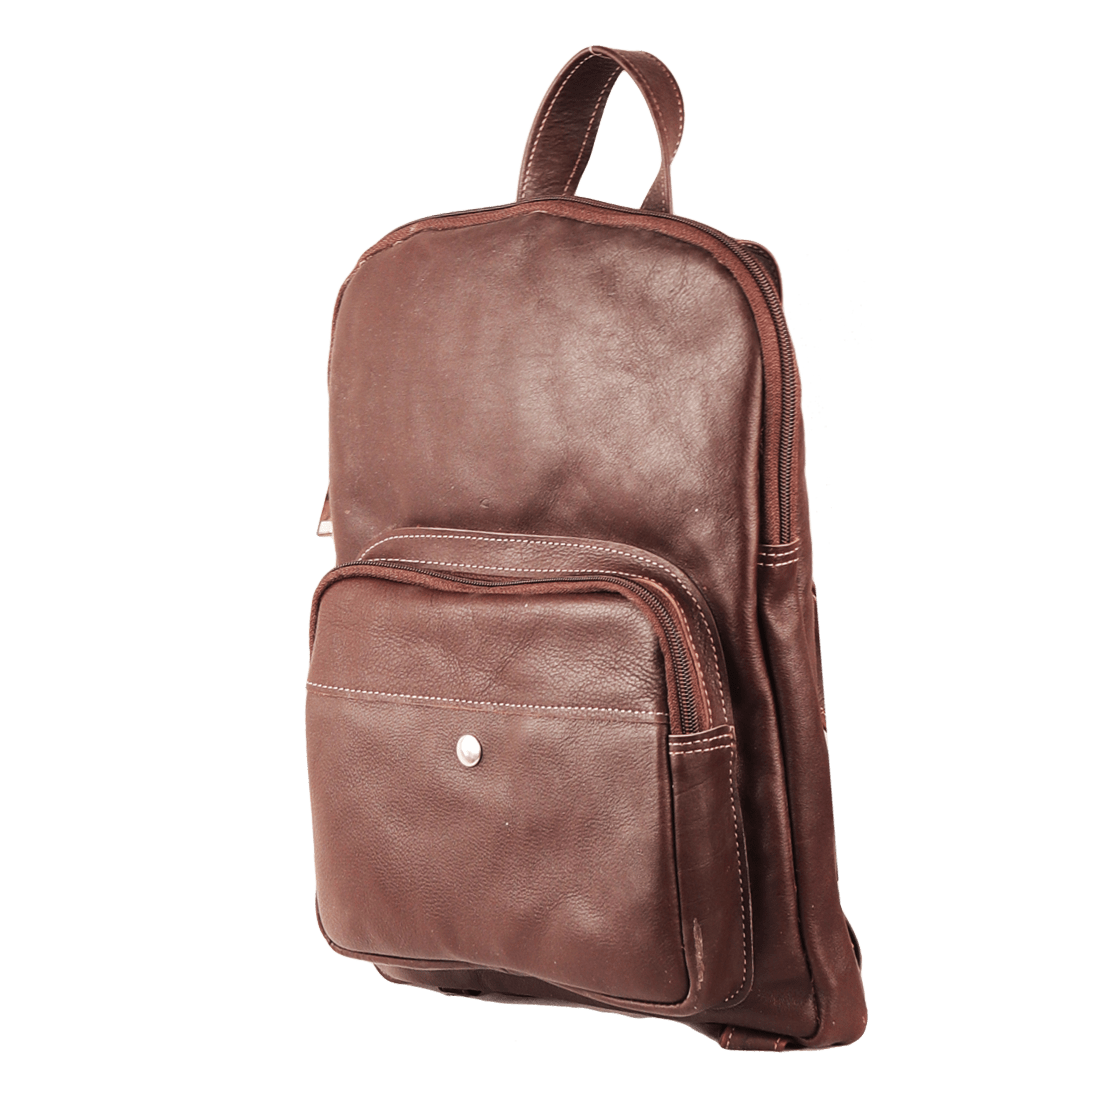 Brown Backpack No Background